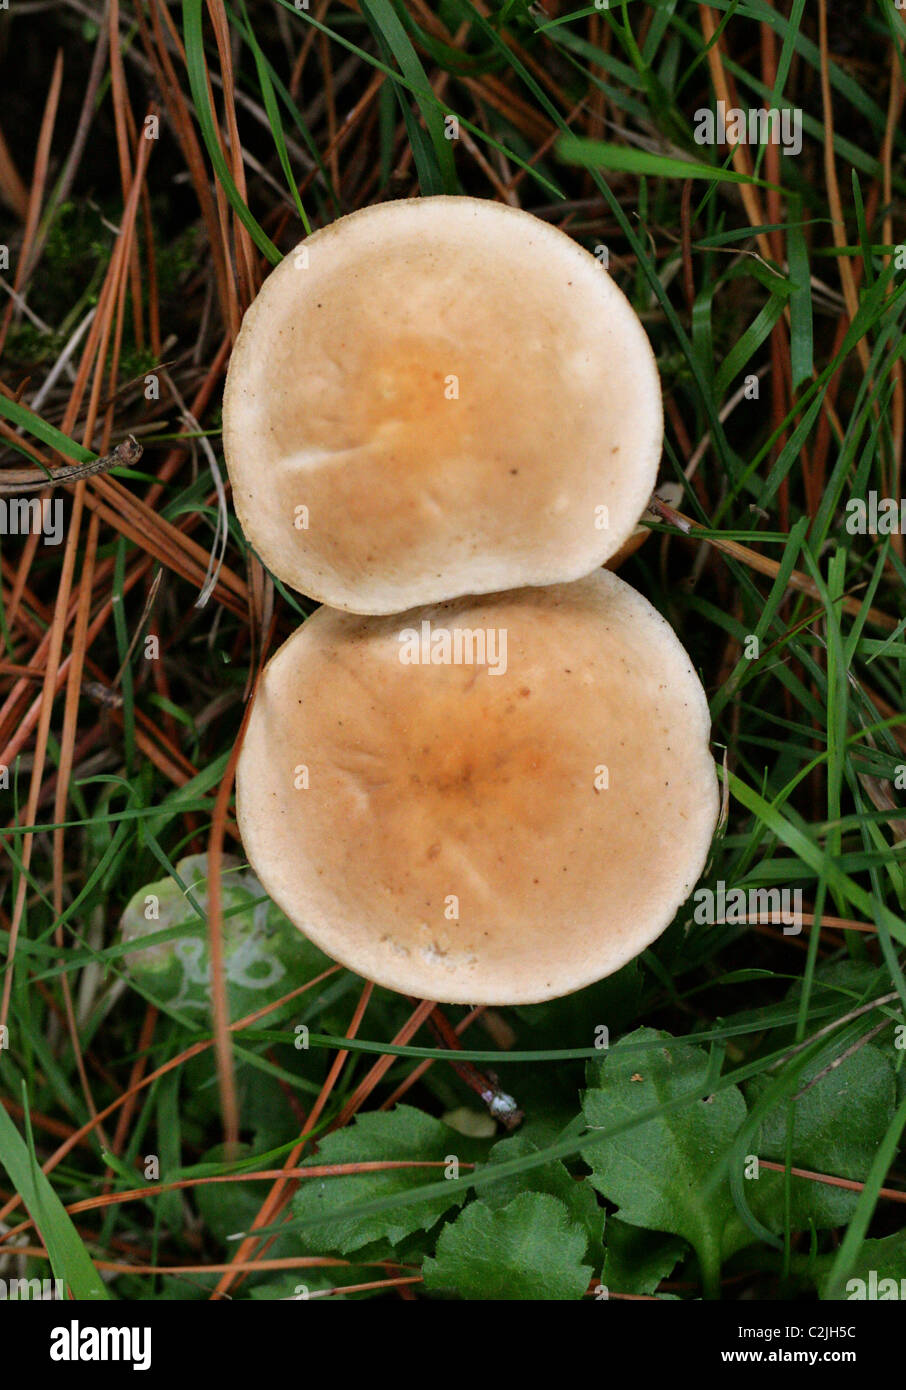 Fungus Growing in Grass Near Conifer Trees. Stock Photo